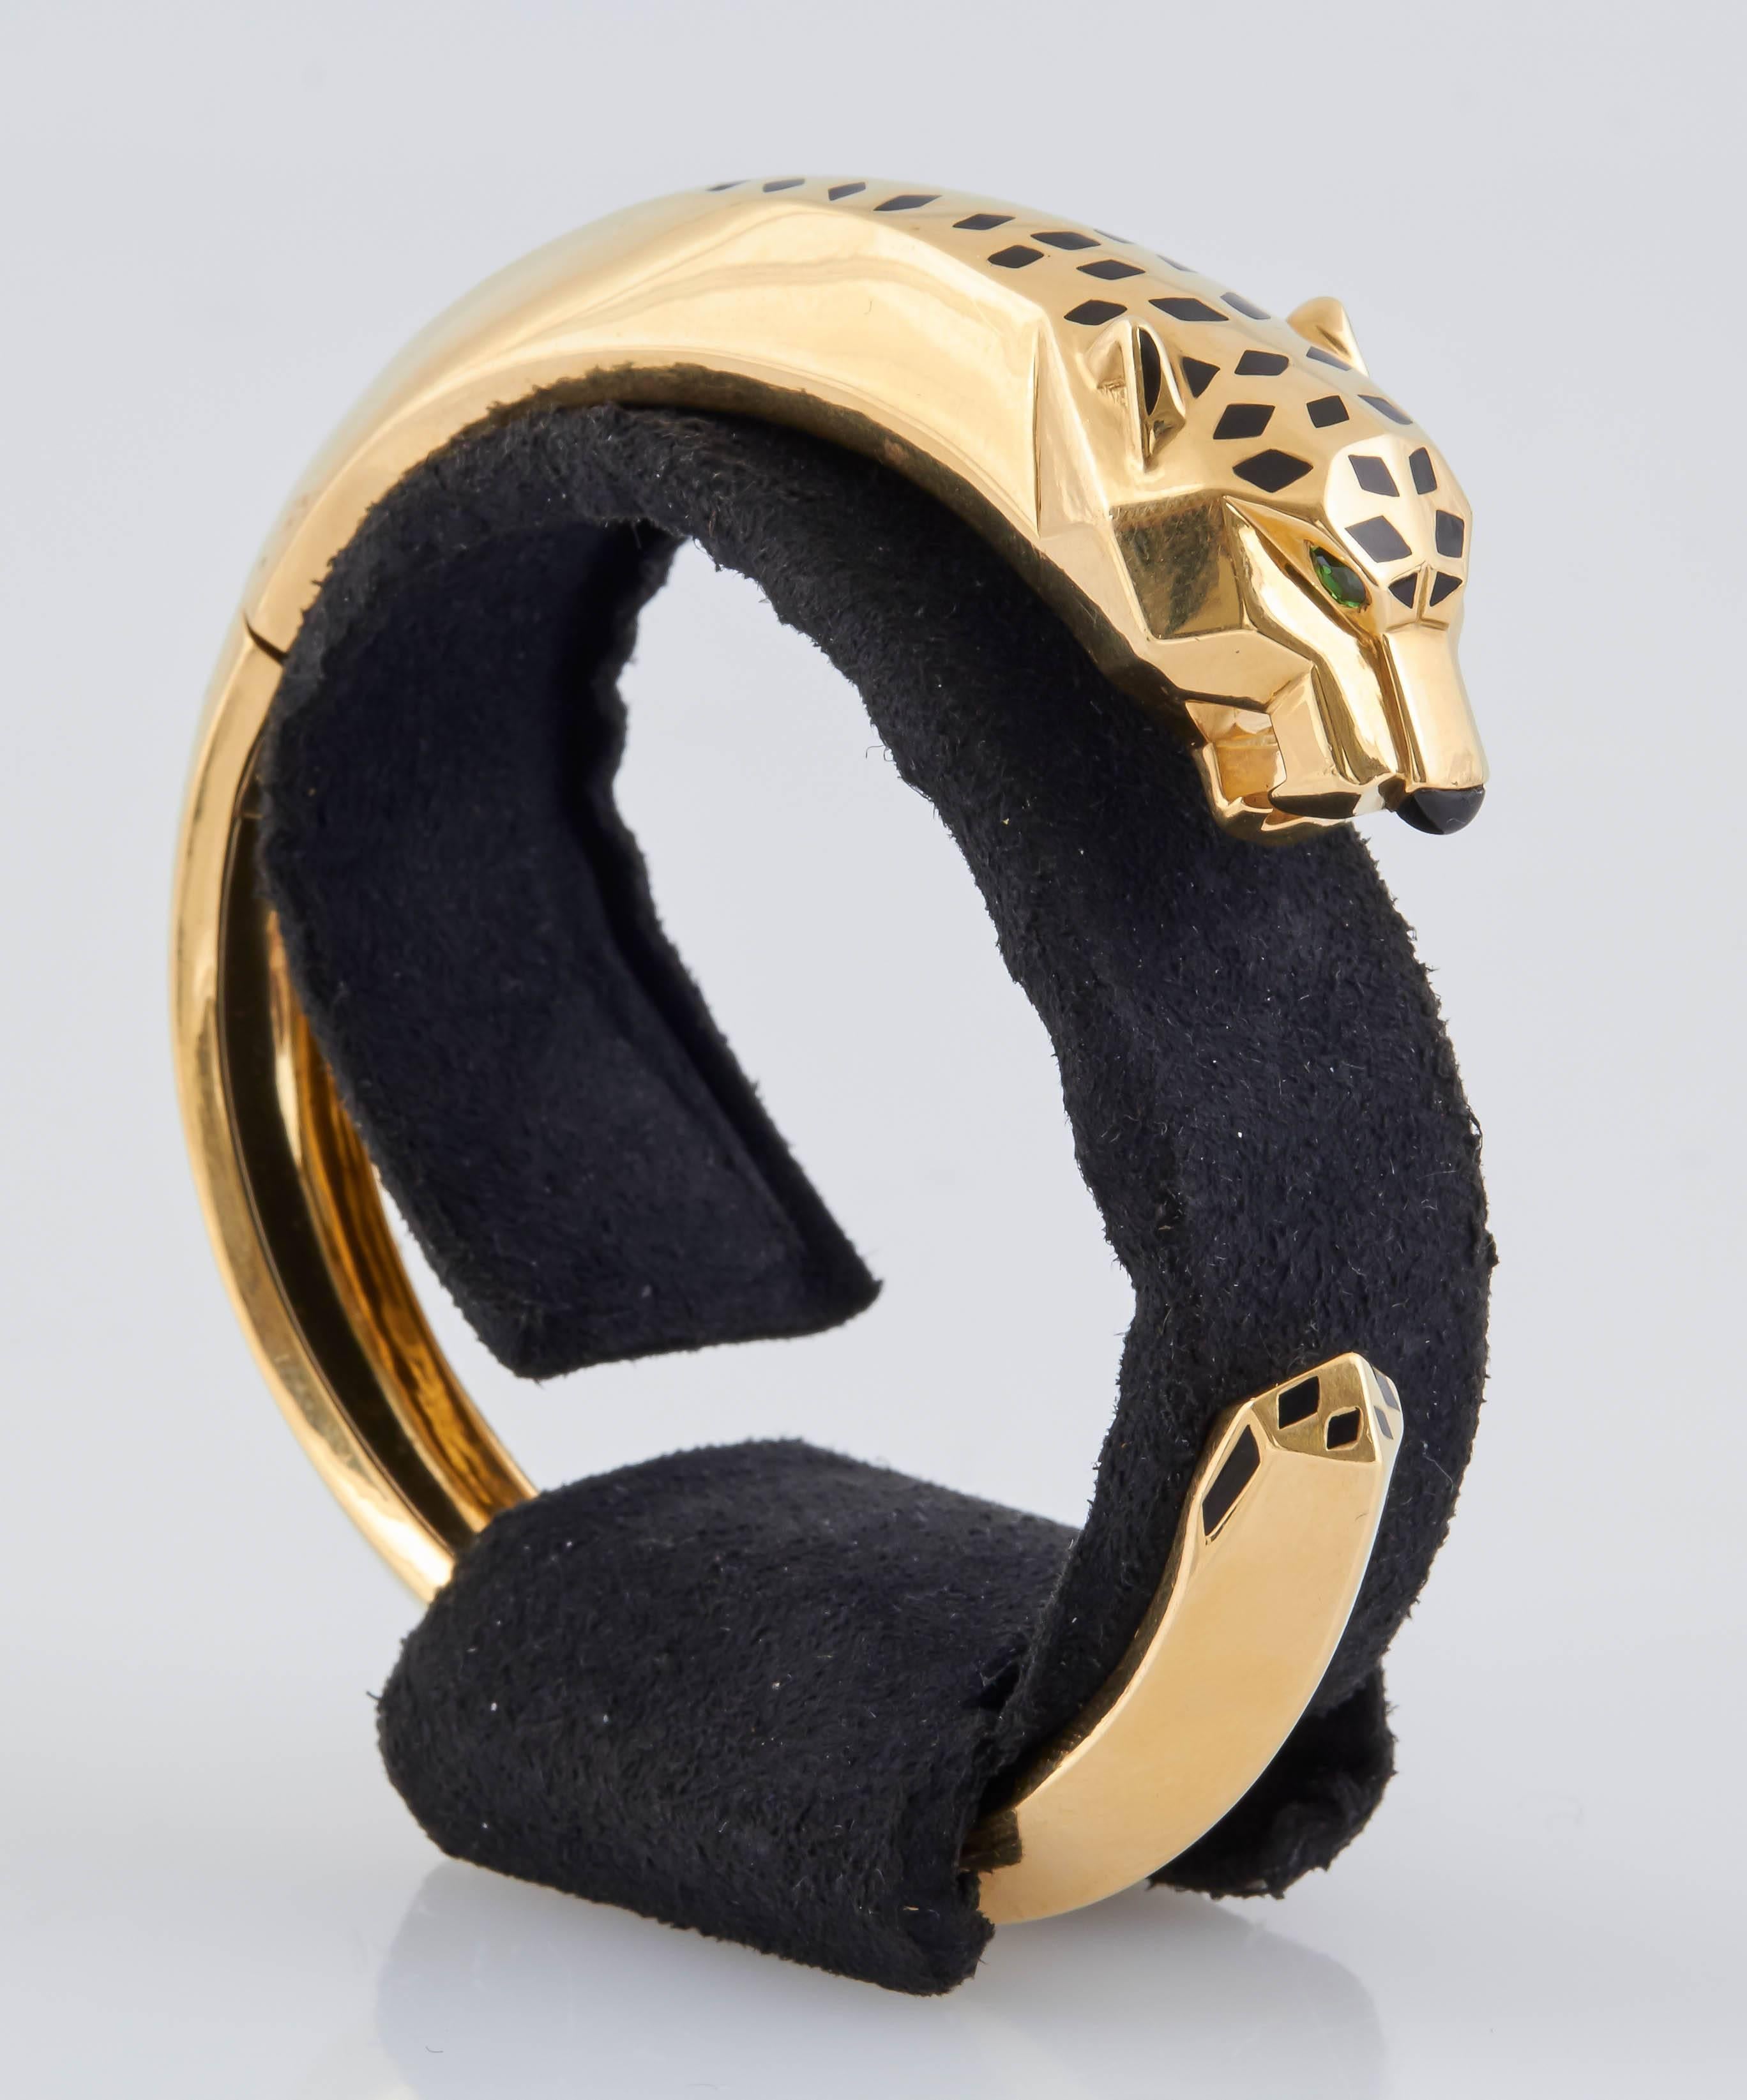 This gorgeous iconic piece is from Cartier's Panthere Collection. Shaped in the likeness of a panther, this signed bracelet is finely crafted in 18K yellow gold. Covered with Black lacquer spots, the panther's head is accentuated by a black onyx